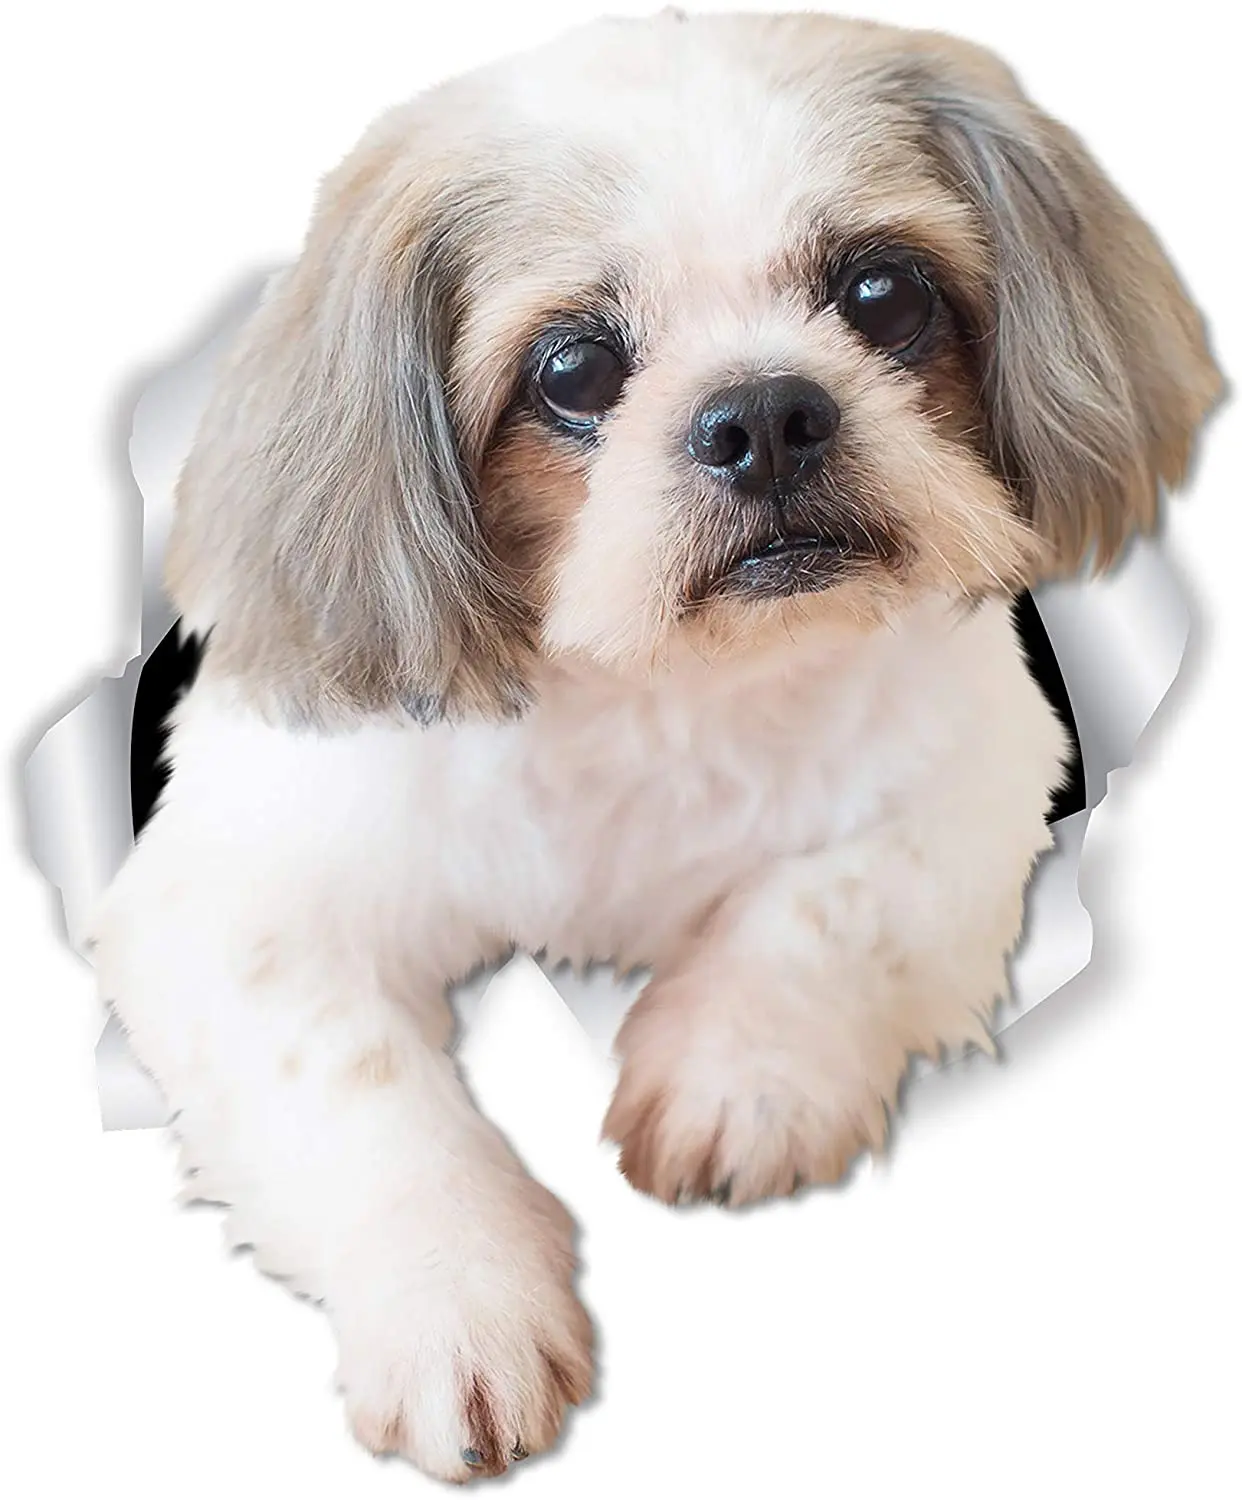 Shih Tzu In Heart Decal Dog Sticker Outdoor Grade Vinyl AnyColour Buy 2 Get1Free 